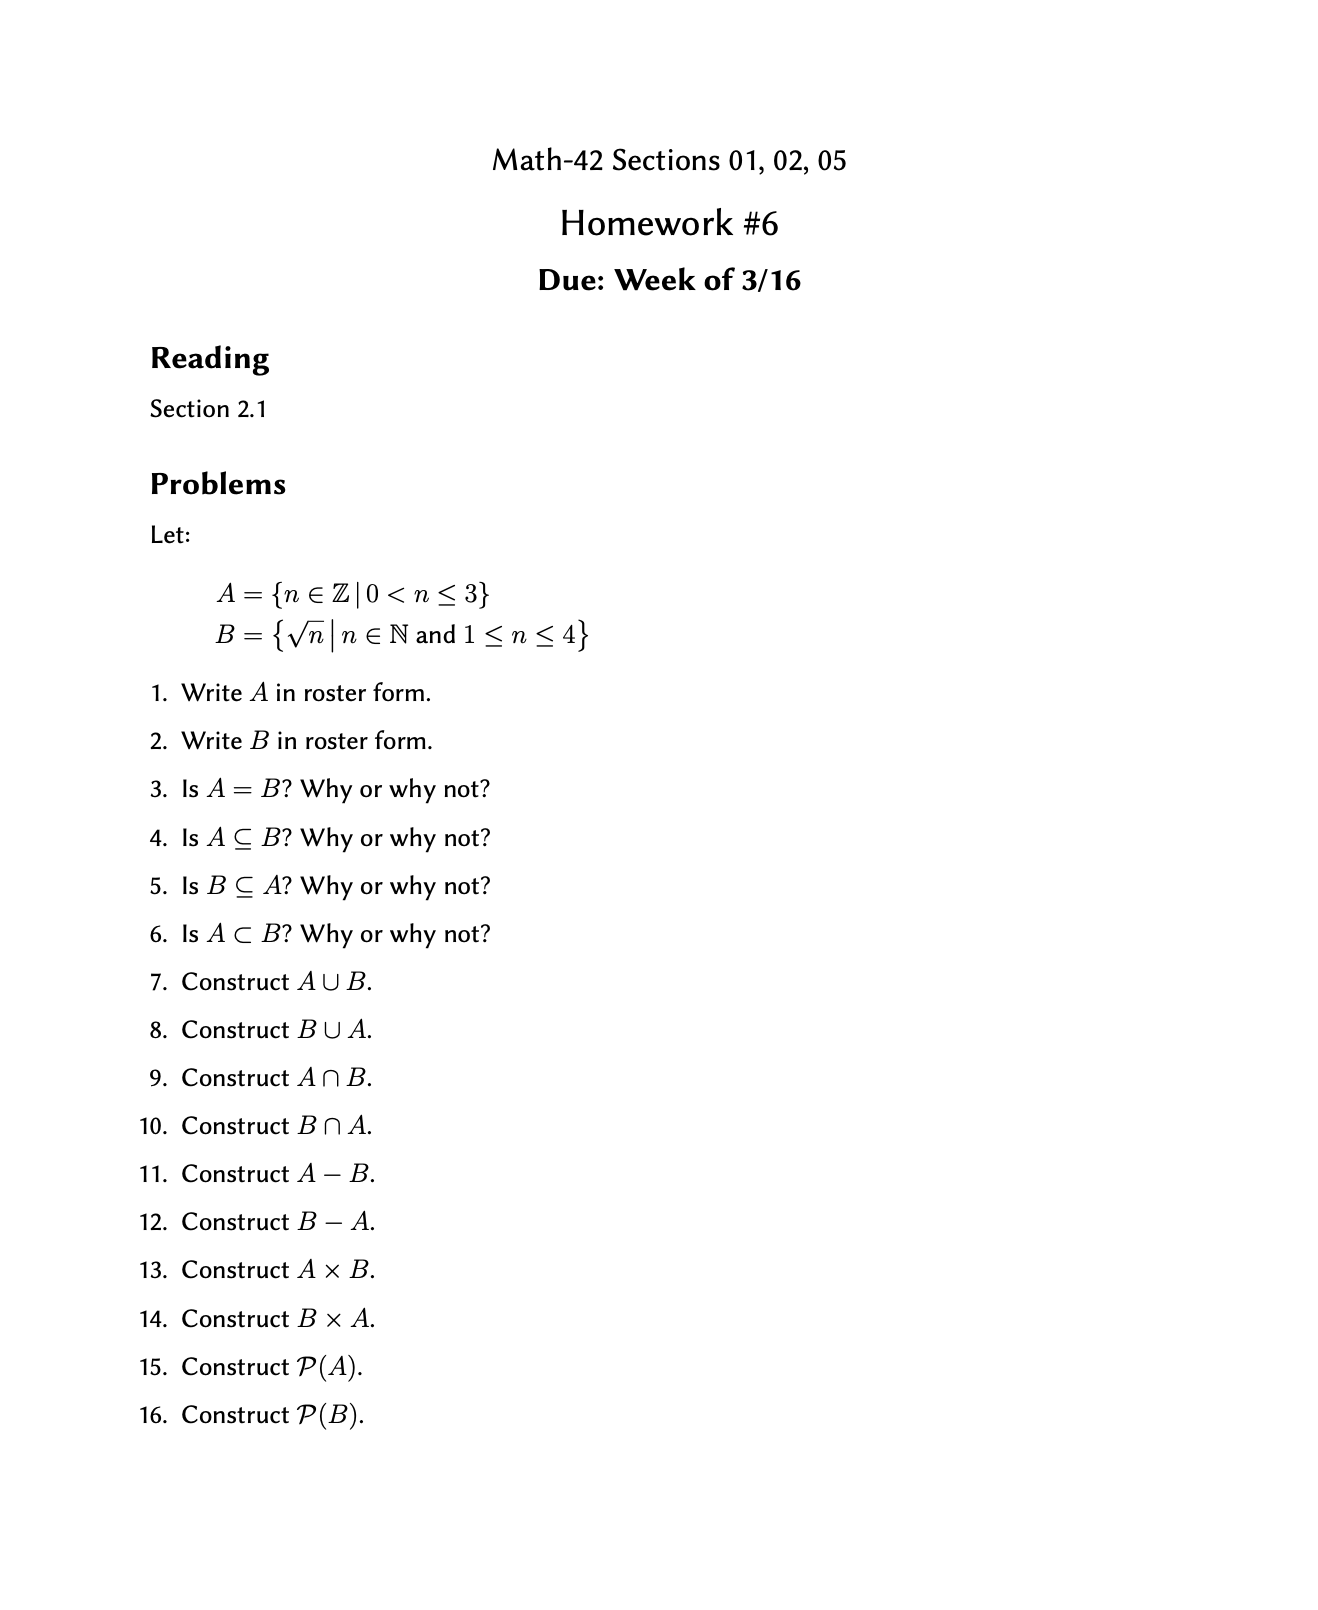 Math-42 Sections 01, 02, 05
Homework #6
Due: Week of 3/16
Reading
Section 2.1
Problems
Let:
A = {n € Z|0< n< 3}
{Vn|n€N and 1<n< 4}
B =
1. Write A in roster form.
2. Write B in roster form.
3. Is A = B? Why or why not?
4. Is A C B? Why or why not?
5. Is B C A? Why or why not?
6. Is A C B? Why or why not?
7. Construct AUB.
8. Construct BU A.
9. Construct AN B.
10. Construct Bn A.
11. Construct A – B.
12. Construct B – A.
13. Construct A x B.
14. Construct B × A.
15. Construct P(A).
16. Construct P(B).
